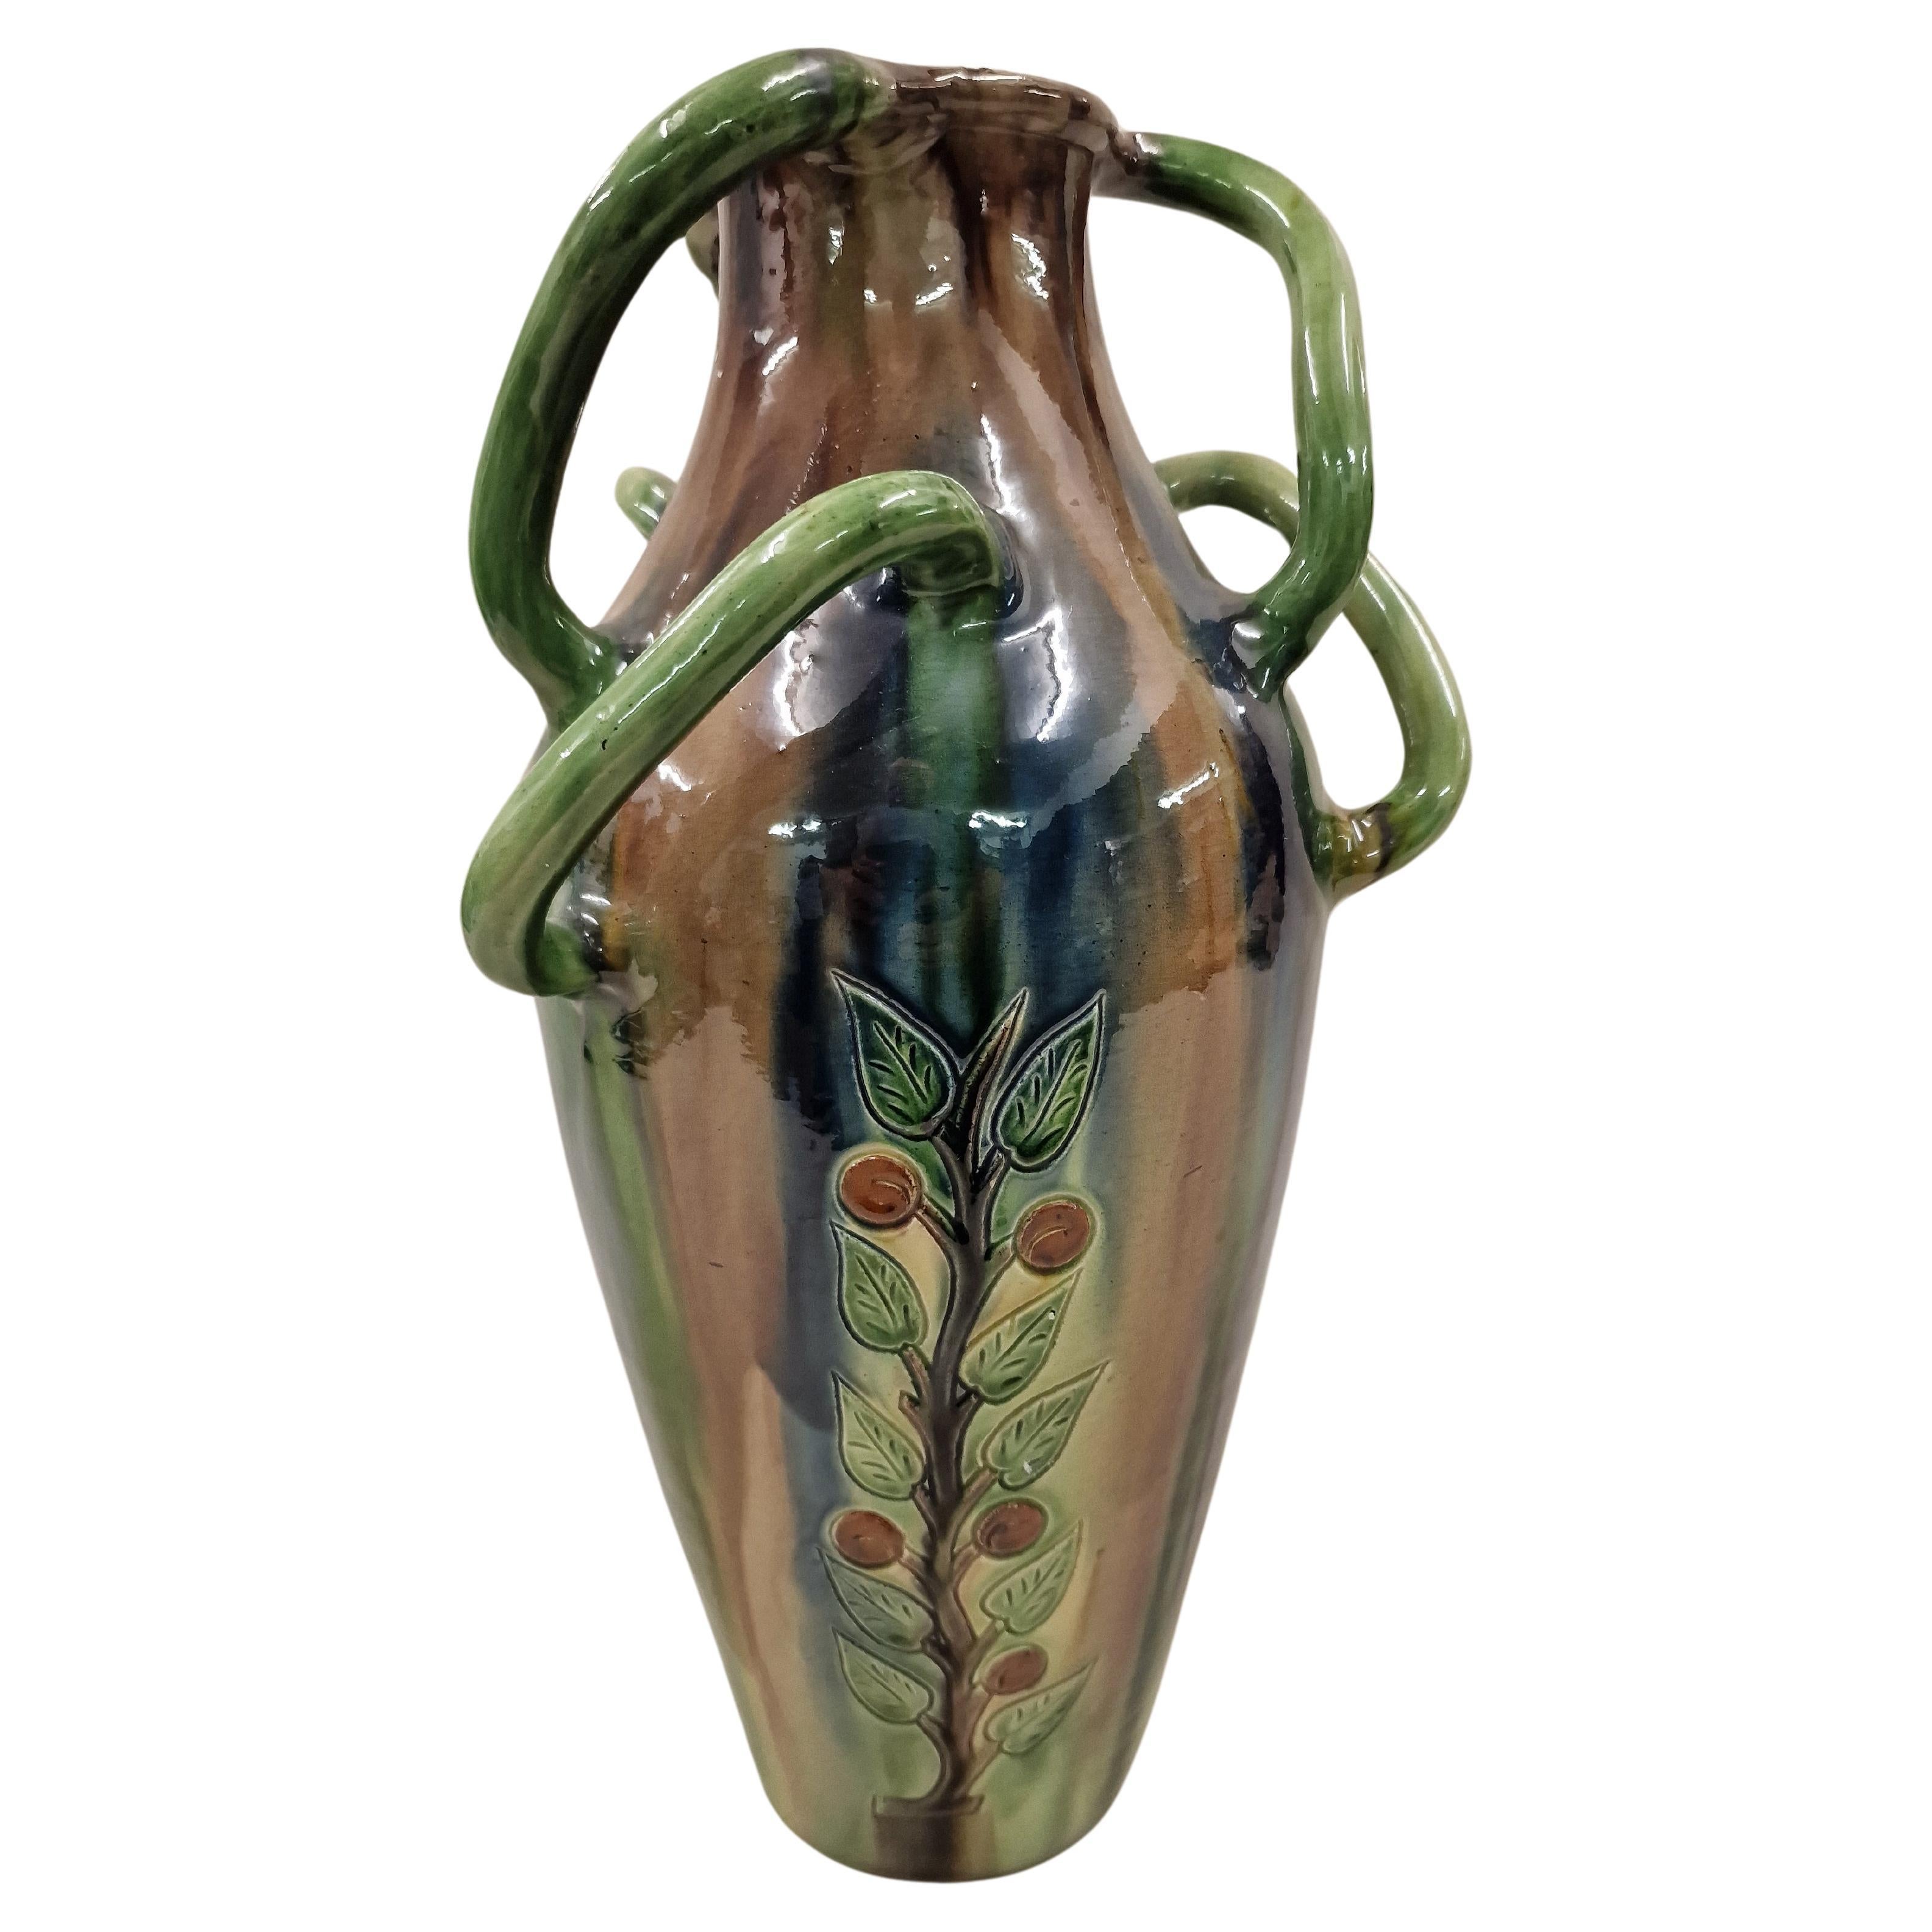 Stunning, rare early floral abstract vase, ceramic, Art Nouveau, 1910 Belgium